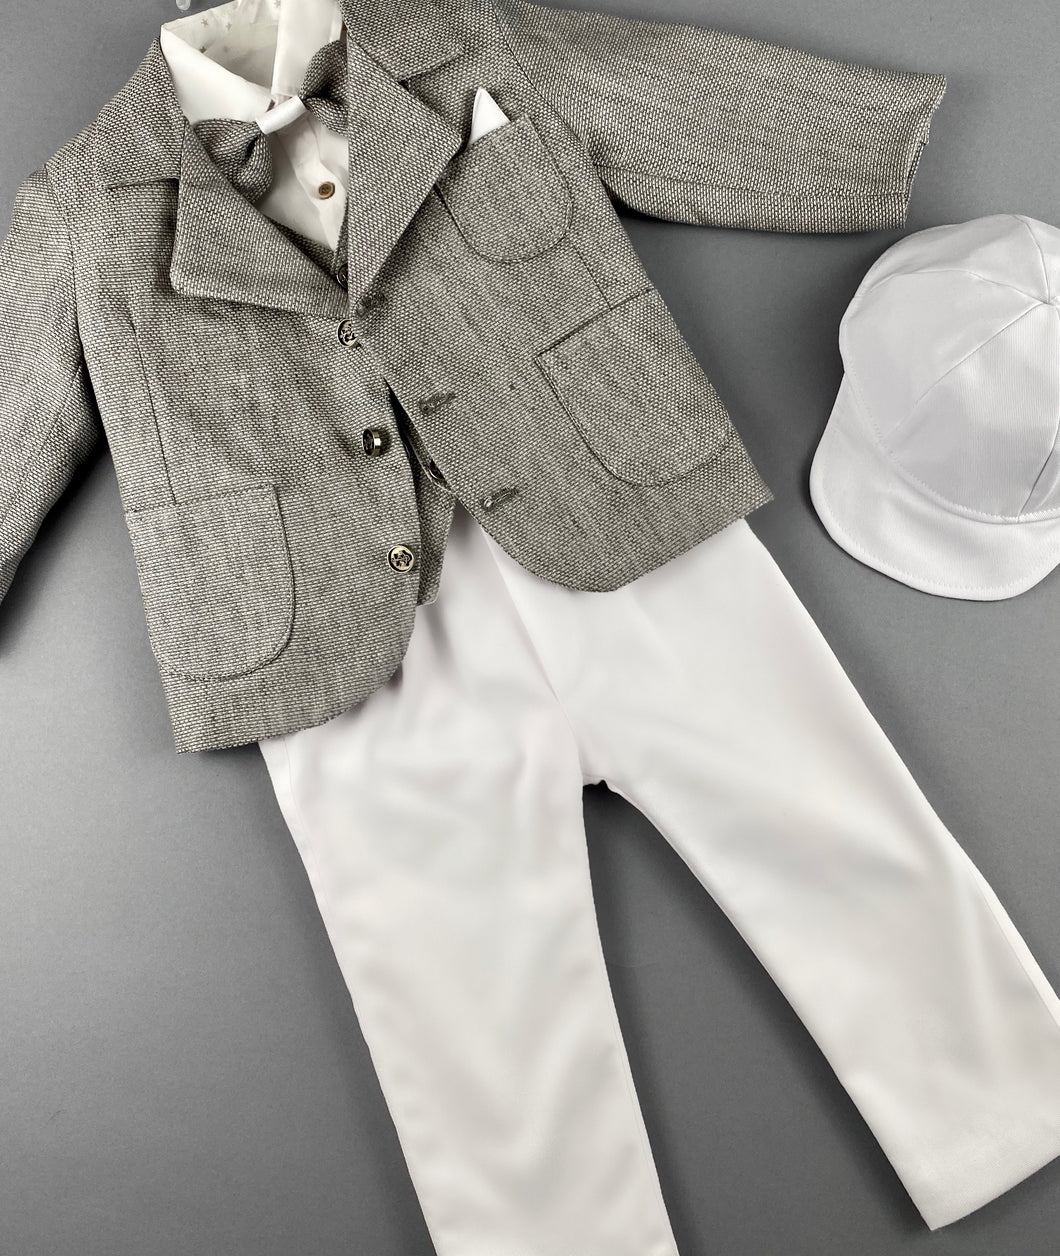 Rosies Collections 7pc full suit, Dress shirt with cuff sleeves, Bow Tie, Pants, Jacket with Matching Vest,  Belt or Suspenders & Cap. Made in Greece exclusively for Rosies Collections S201928